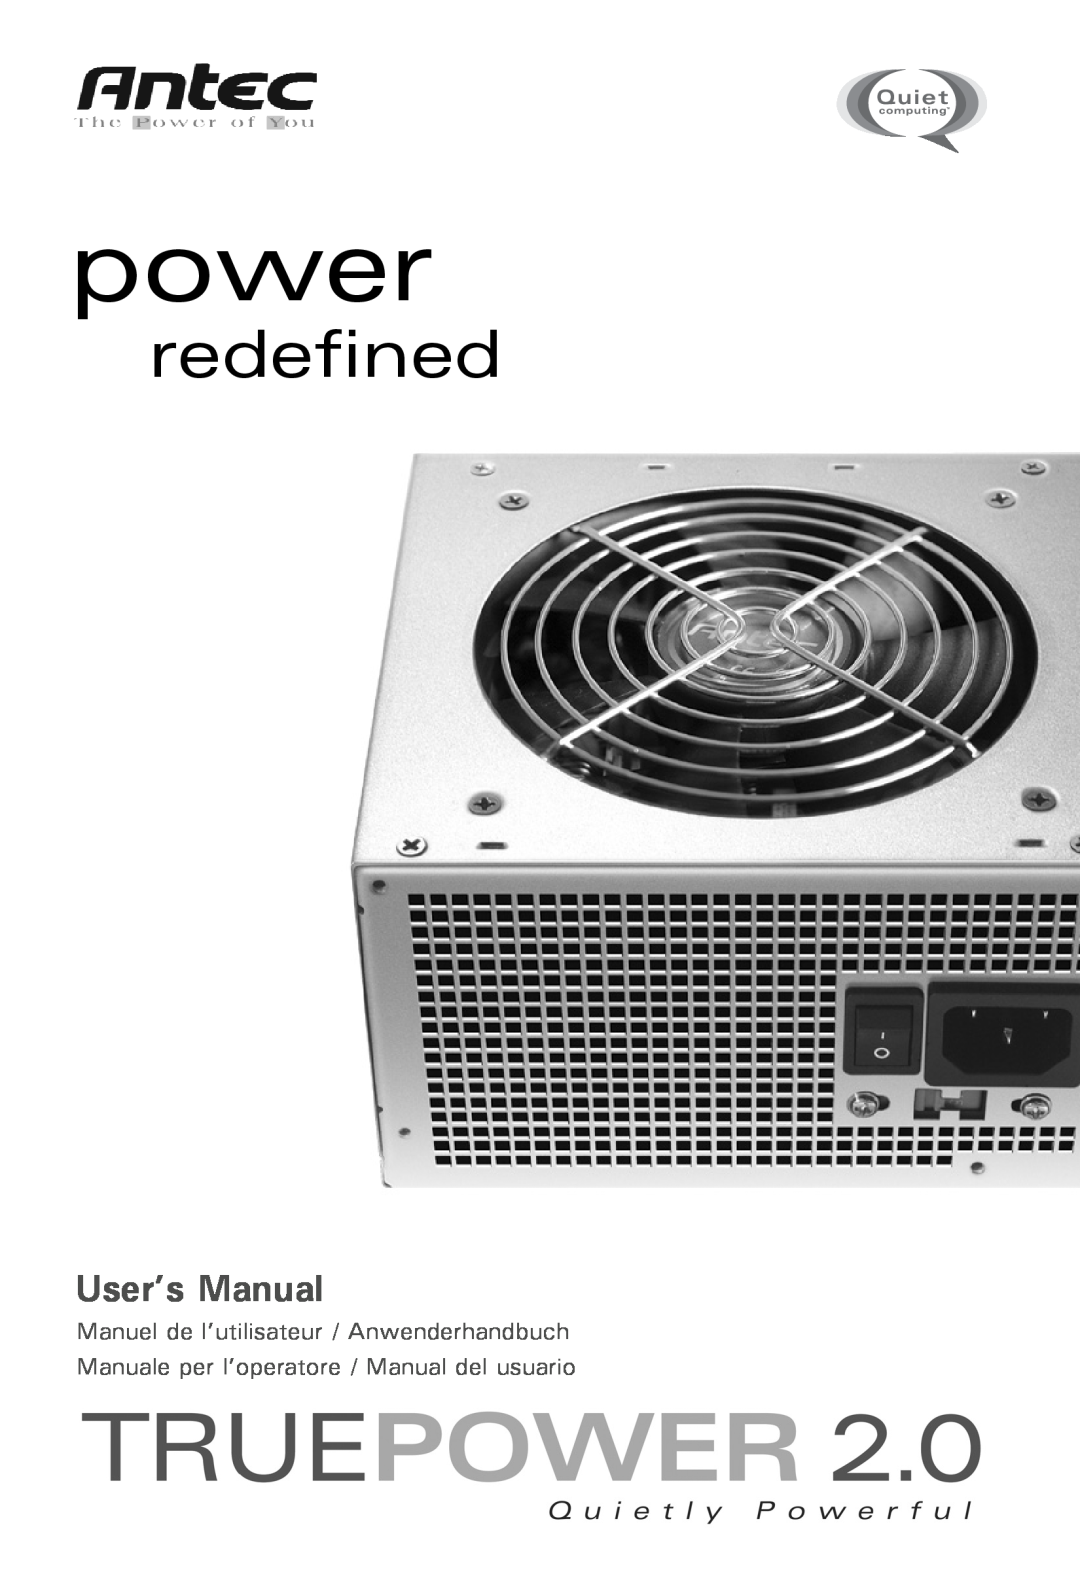 Antec TPII-430, TPII-550, TPII-480, TPII-380 user manual power, redefined, User’s Manual 